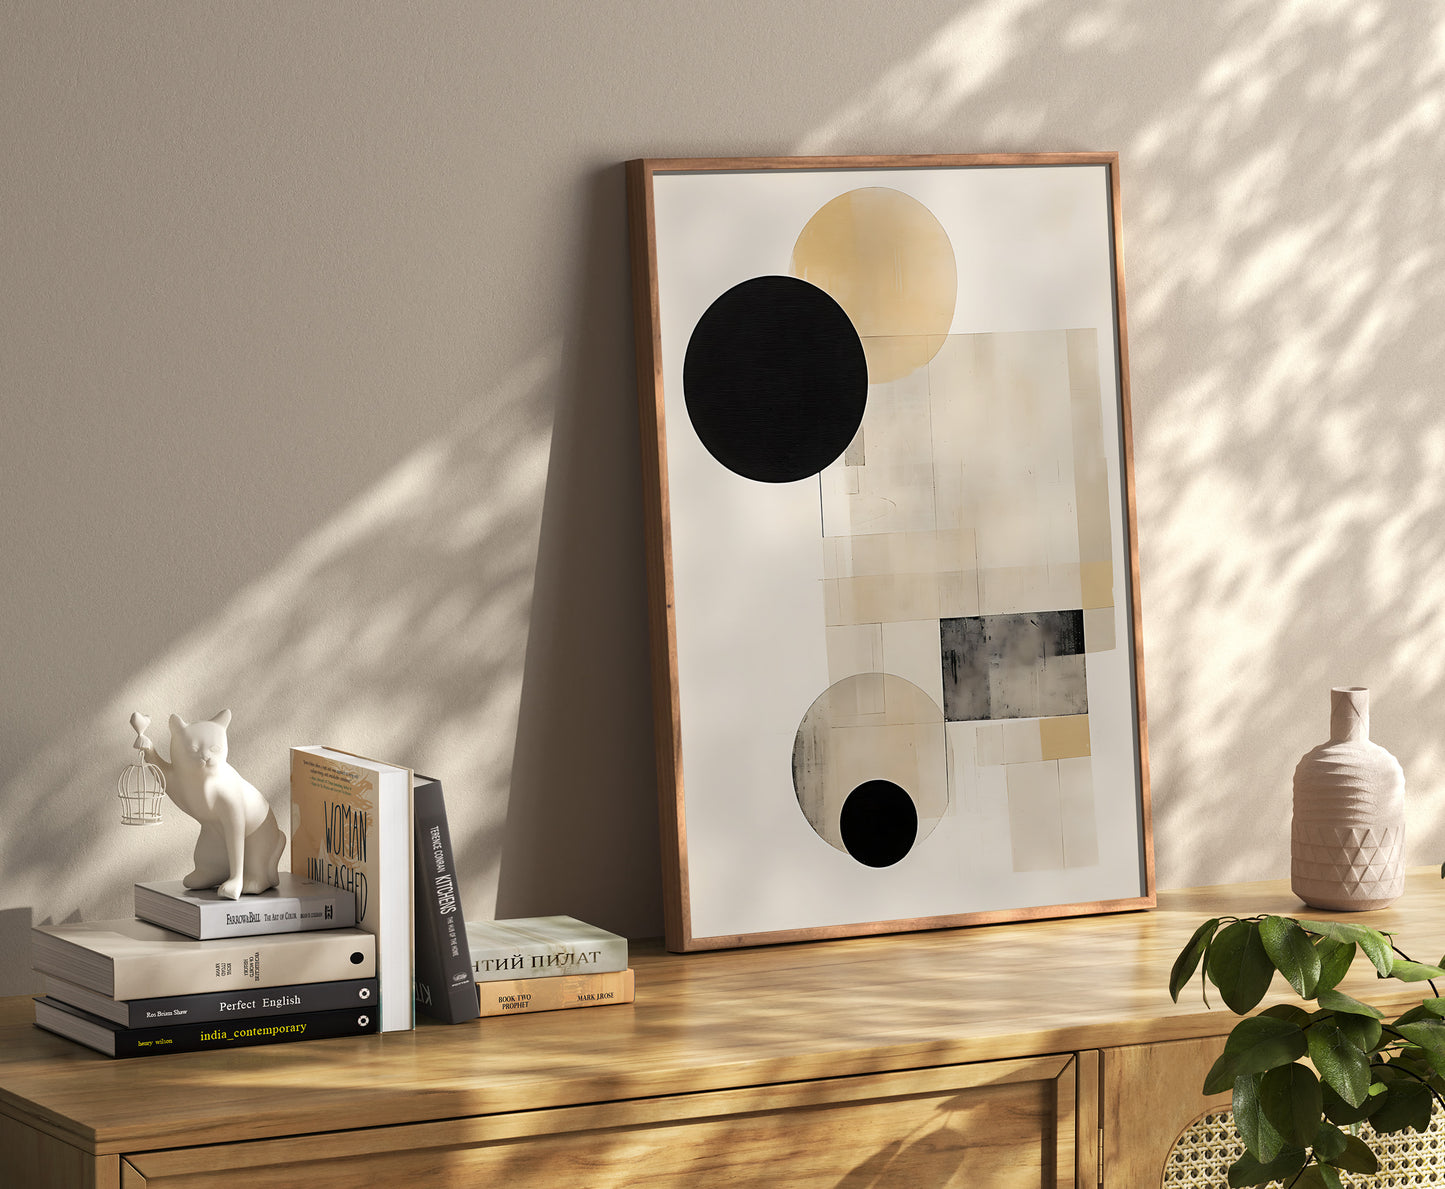 A minimalist artwork with geometric shapes in a room with books and decorative items.